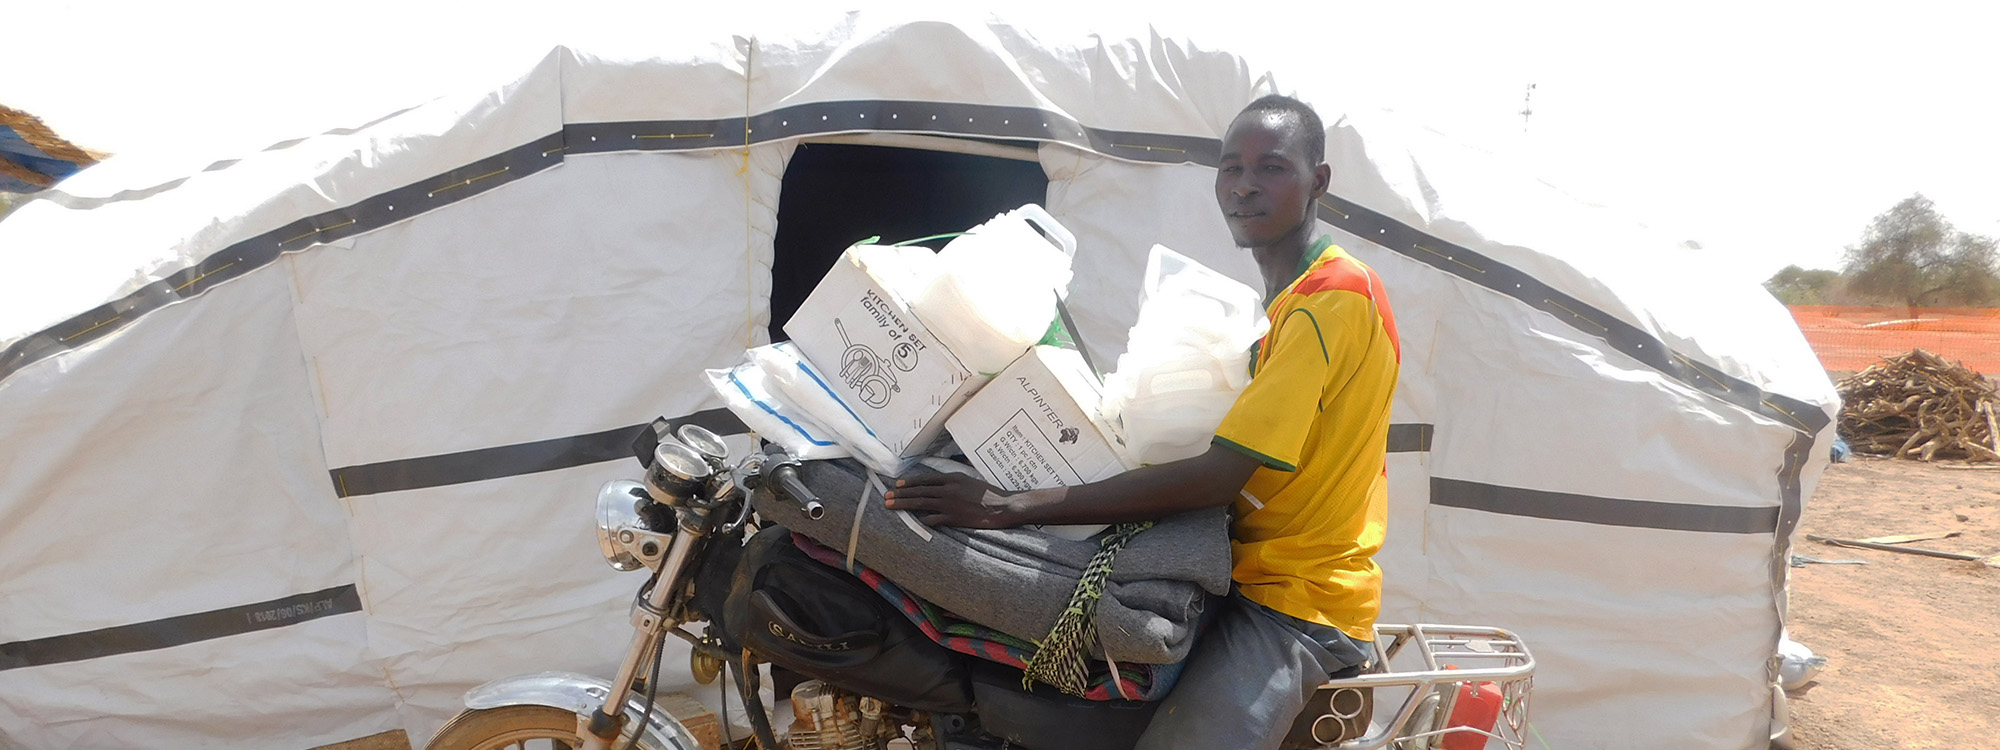 Man sitting on a motorbike holding aid items in front of a sahelian tent in Burkina Faso